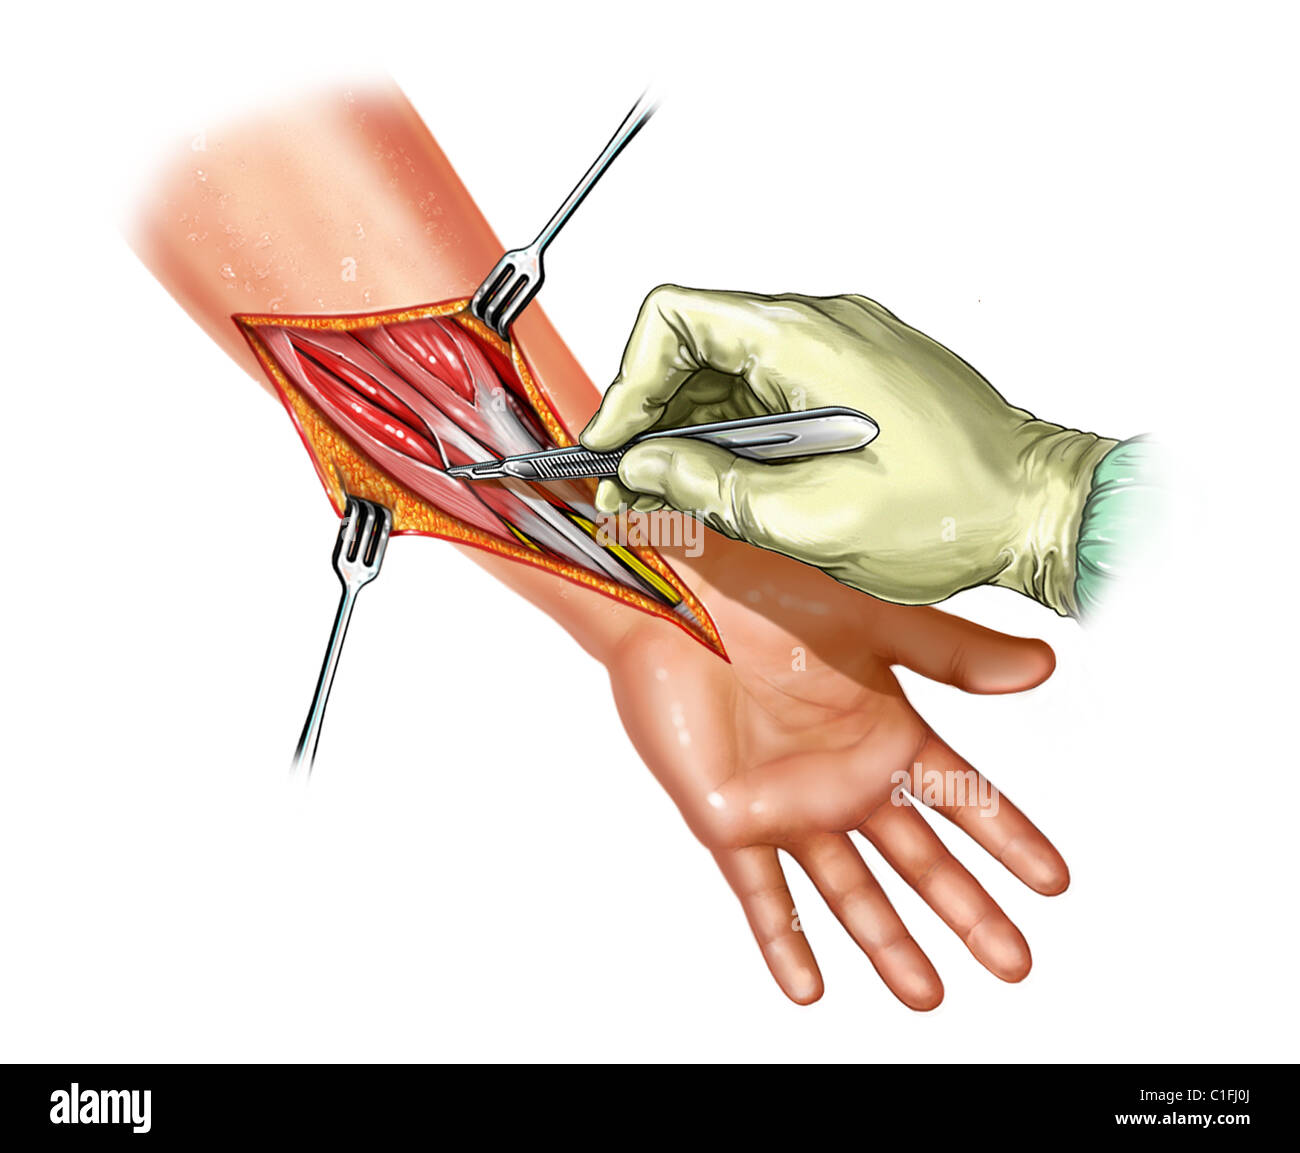 This medical illustration depicts a fasciotomy to the forearm. Stock Photo